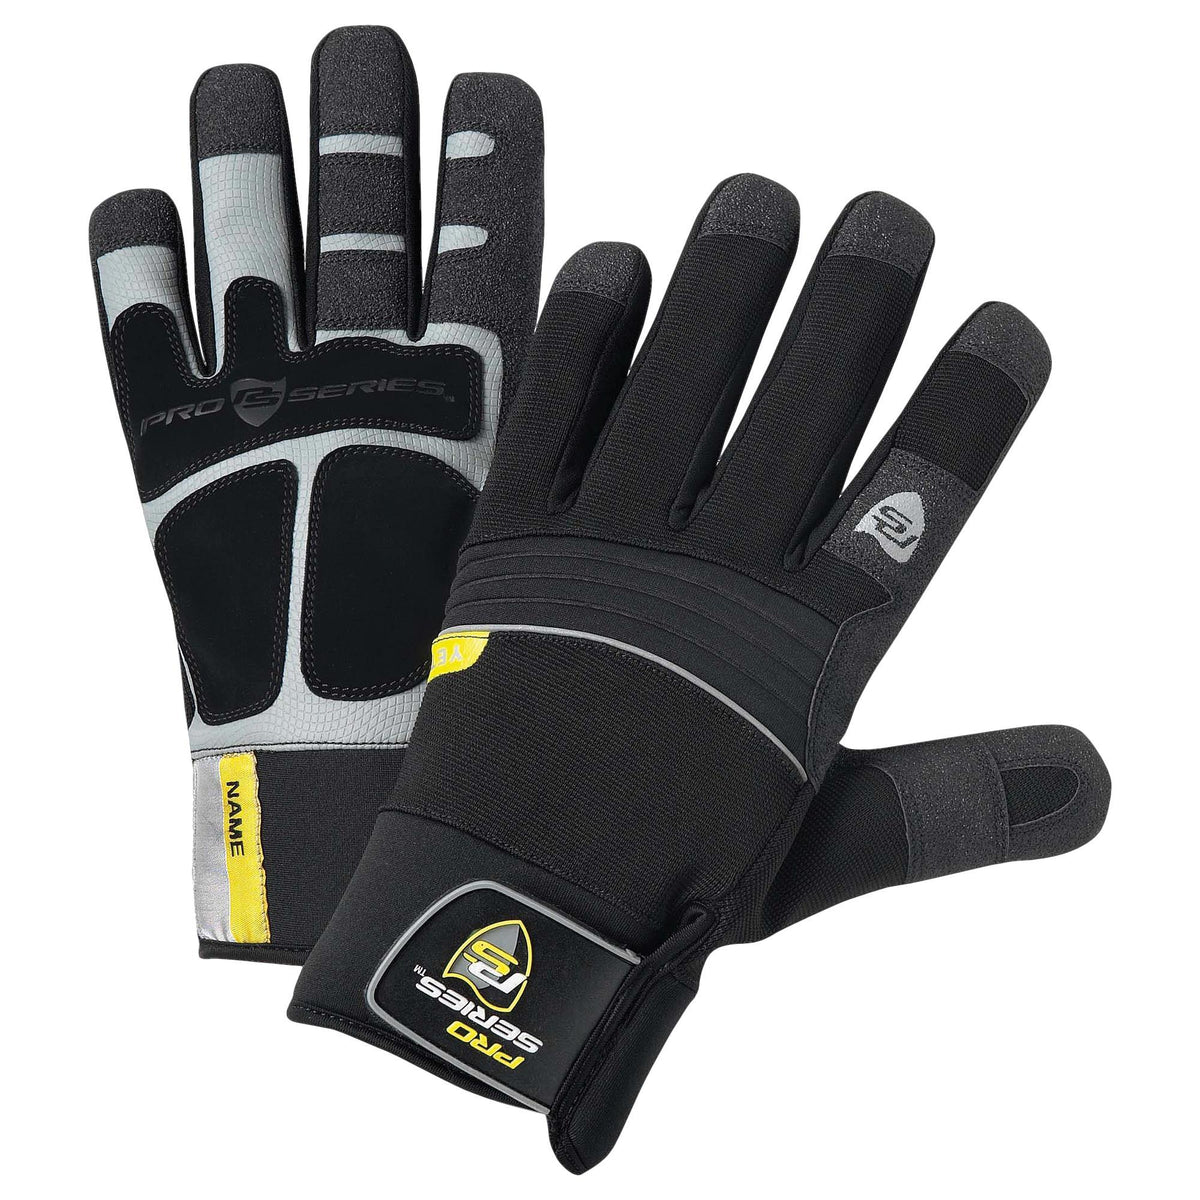 Westchester Premium Coated Thermal Knit Gloves 1PAIR